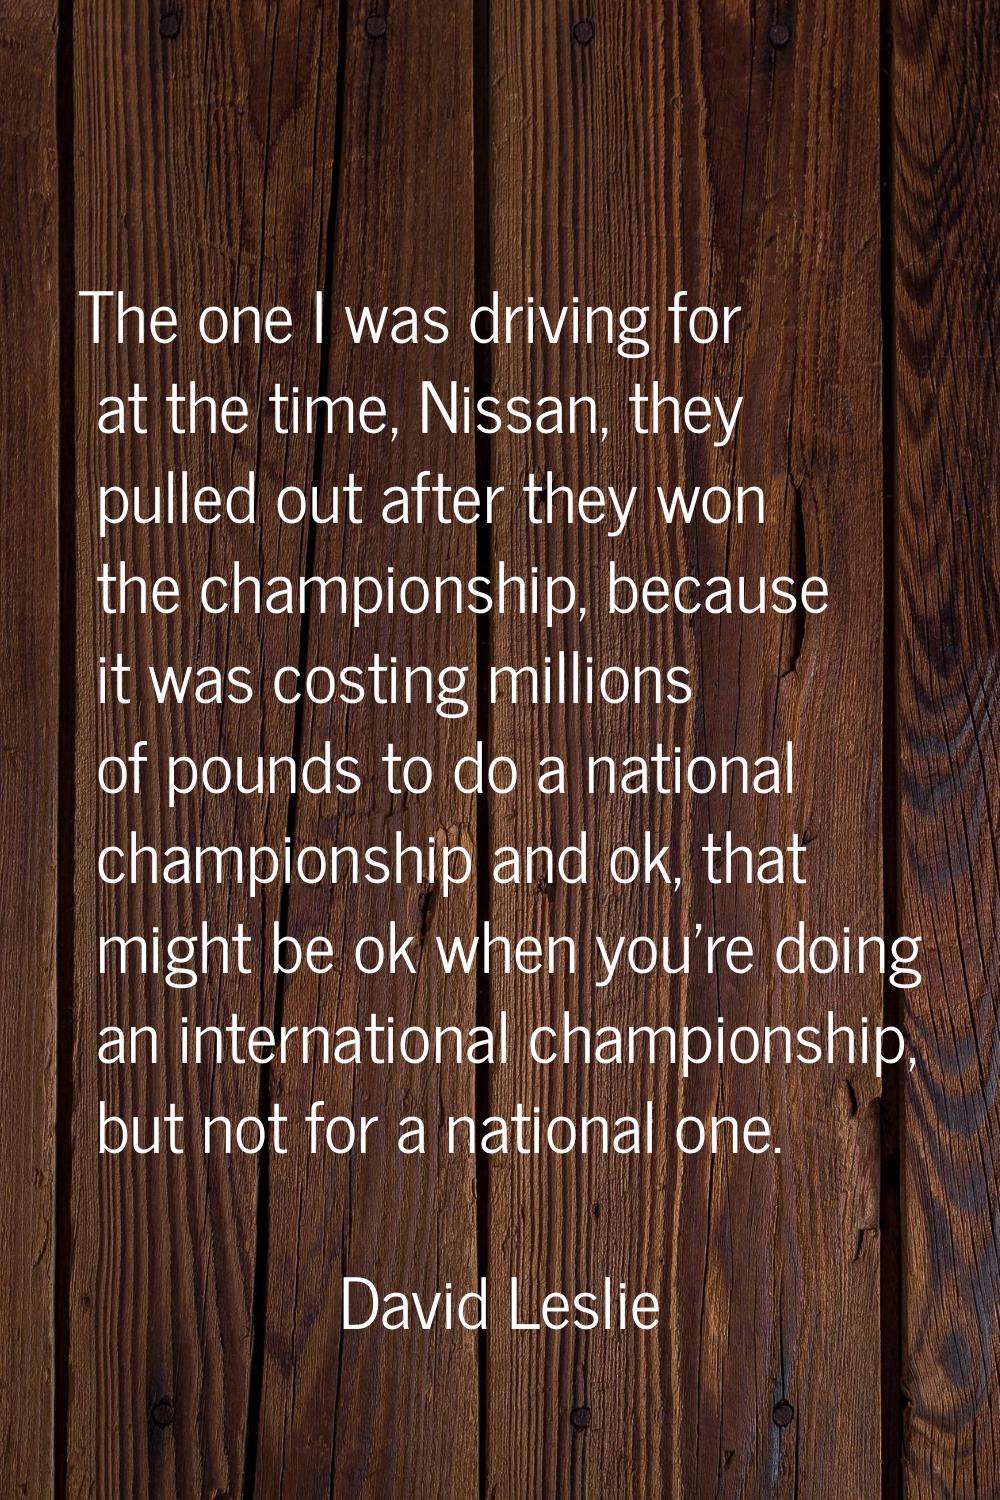 The one I was driving for at the time, Nissan, they pulled out after they won the championship, bec